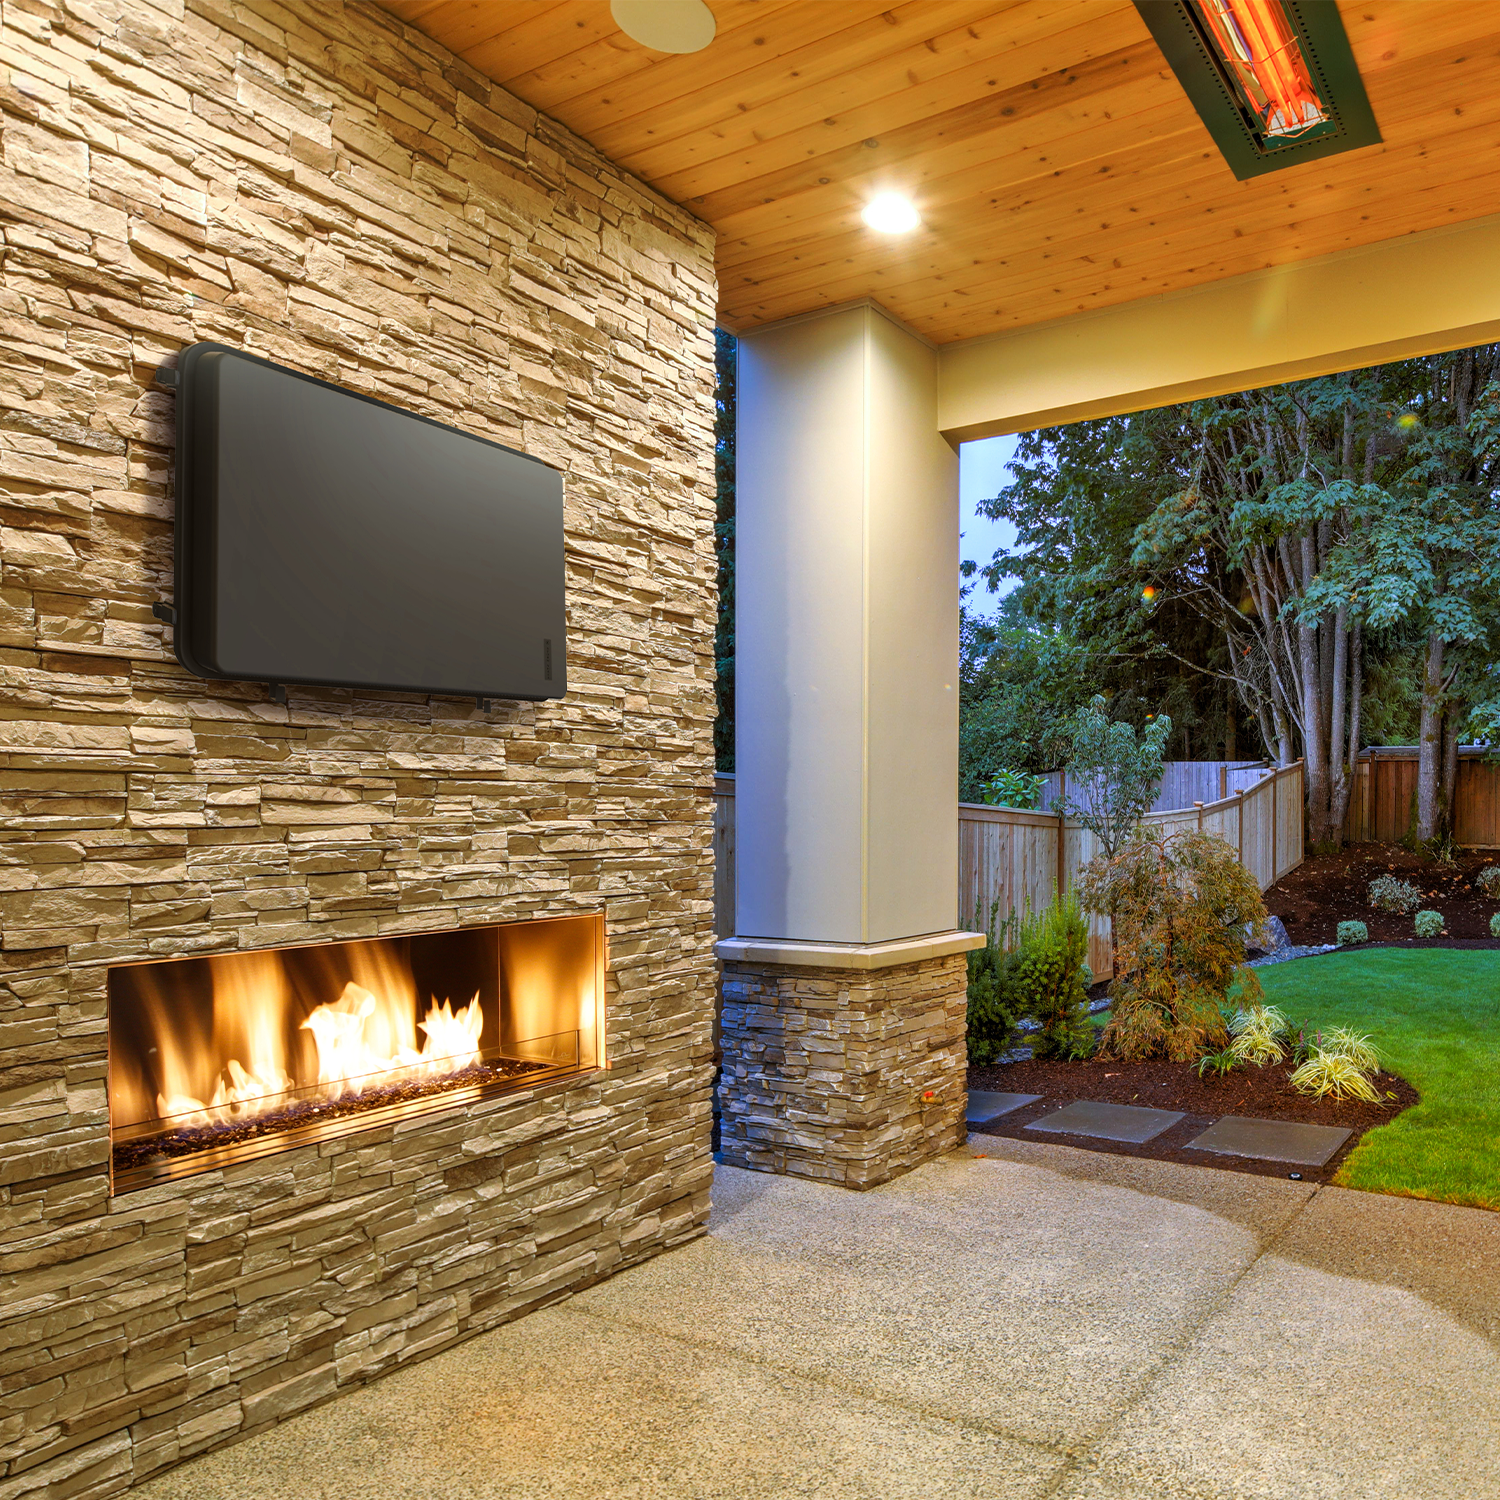 Storm Shell Outdoor Weatherproof TV Enclosure  with ariticulating arm and mounting hardware. Fits up to 44" TV  lifestyle image. Mounted on a rough rock brick wall over a fireplace